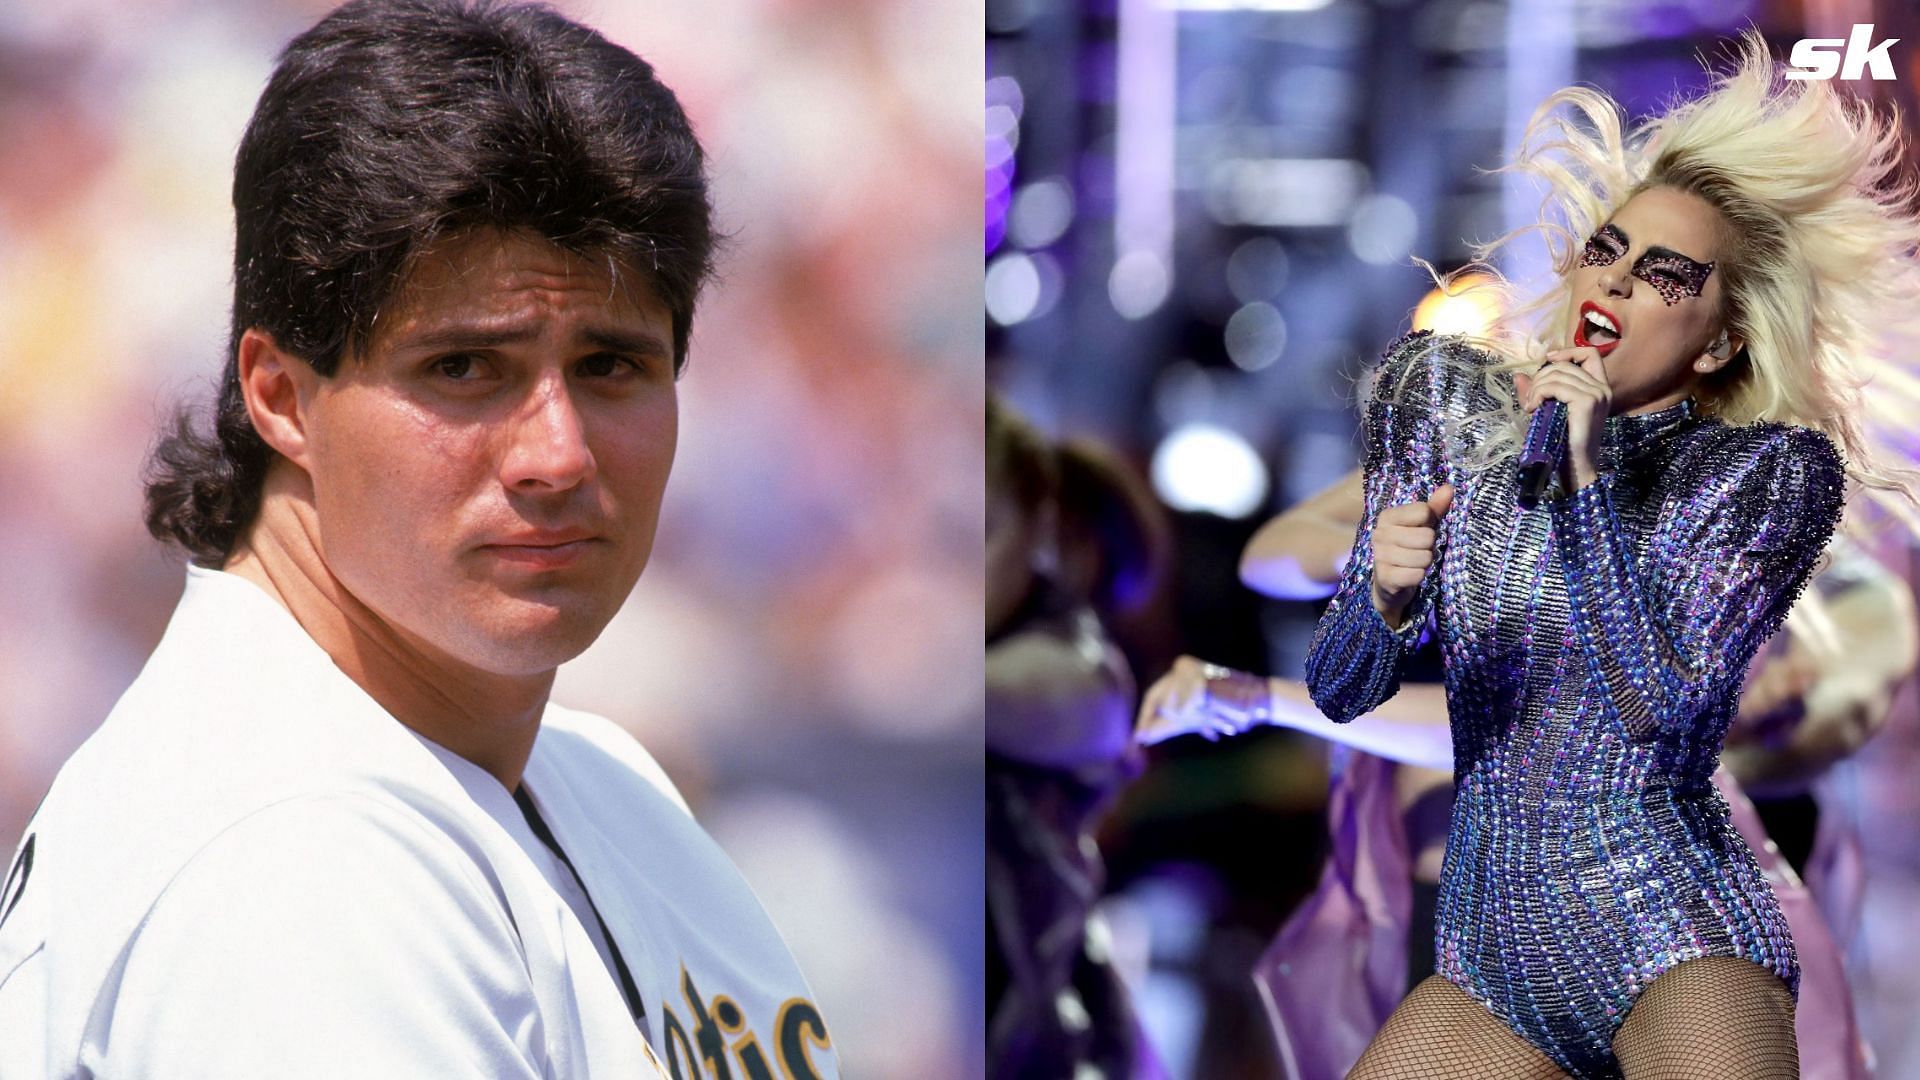 OAKLAND, CA -1990: Jose Canseco #33 of the Oakland Athletics looks on during a 1990 MLB season game at Oakland-Alameda County Coliseum in Oakland, California. (Photo by Otto Greule Jr/Getty Images); HOUSTON, TX - FEBRUARY 05: Lady Gaga performs during the Pepsi Zero Sugar Super Bowl 51 Halftime Show at NRG Stadium on February 5, 2017 in Houston, Texas. (Photo by Ronald Martinez/Getty Images)